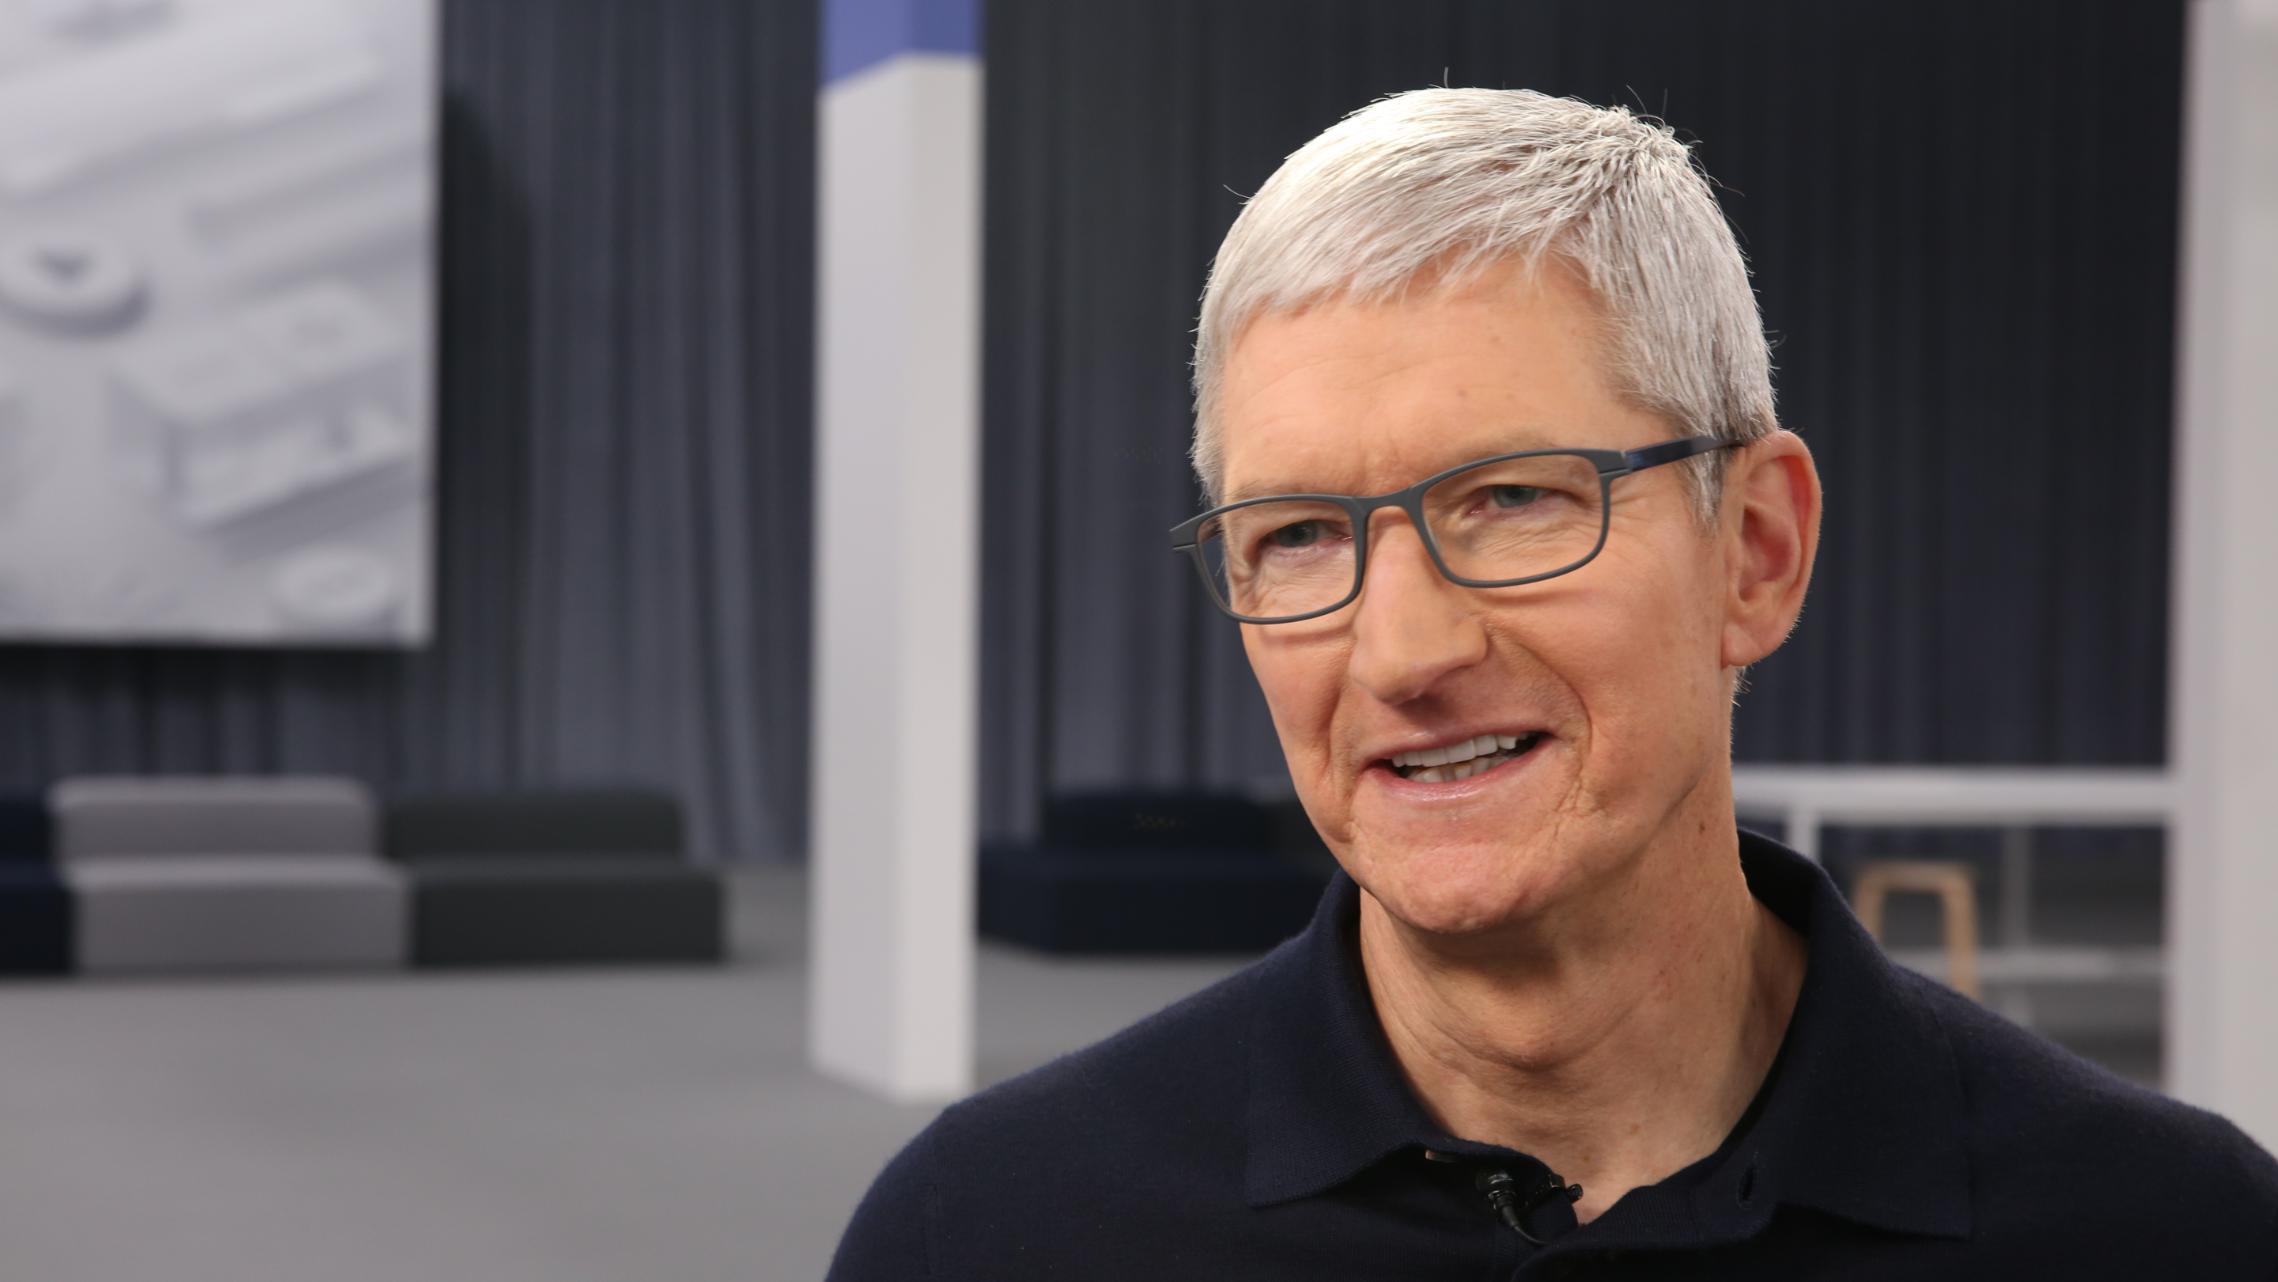 Recollection format Næsten død CNN's full exclusive with Apple CEO Tim Cook - CNN Video